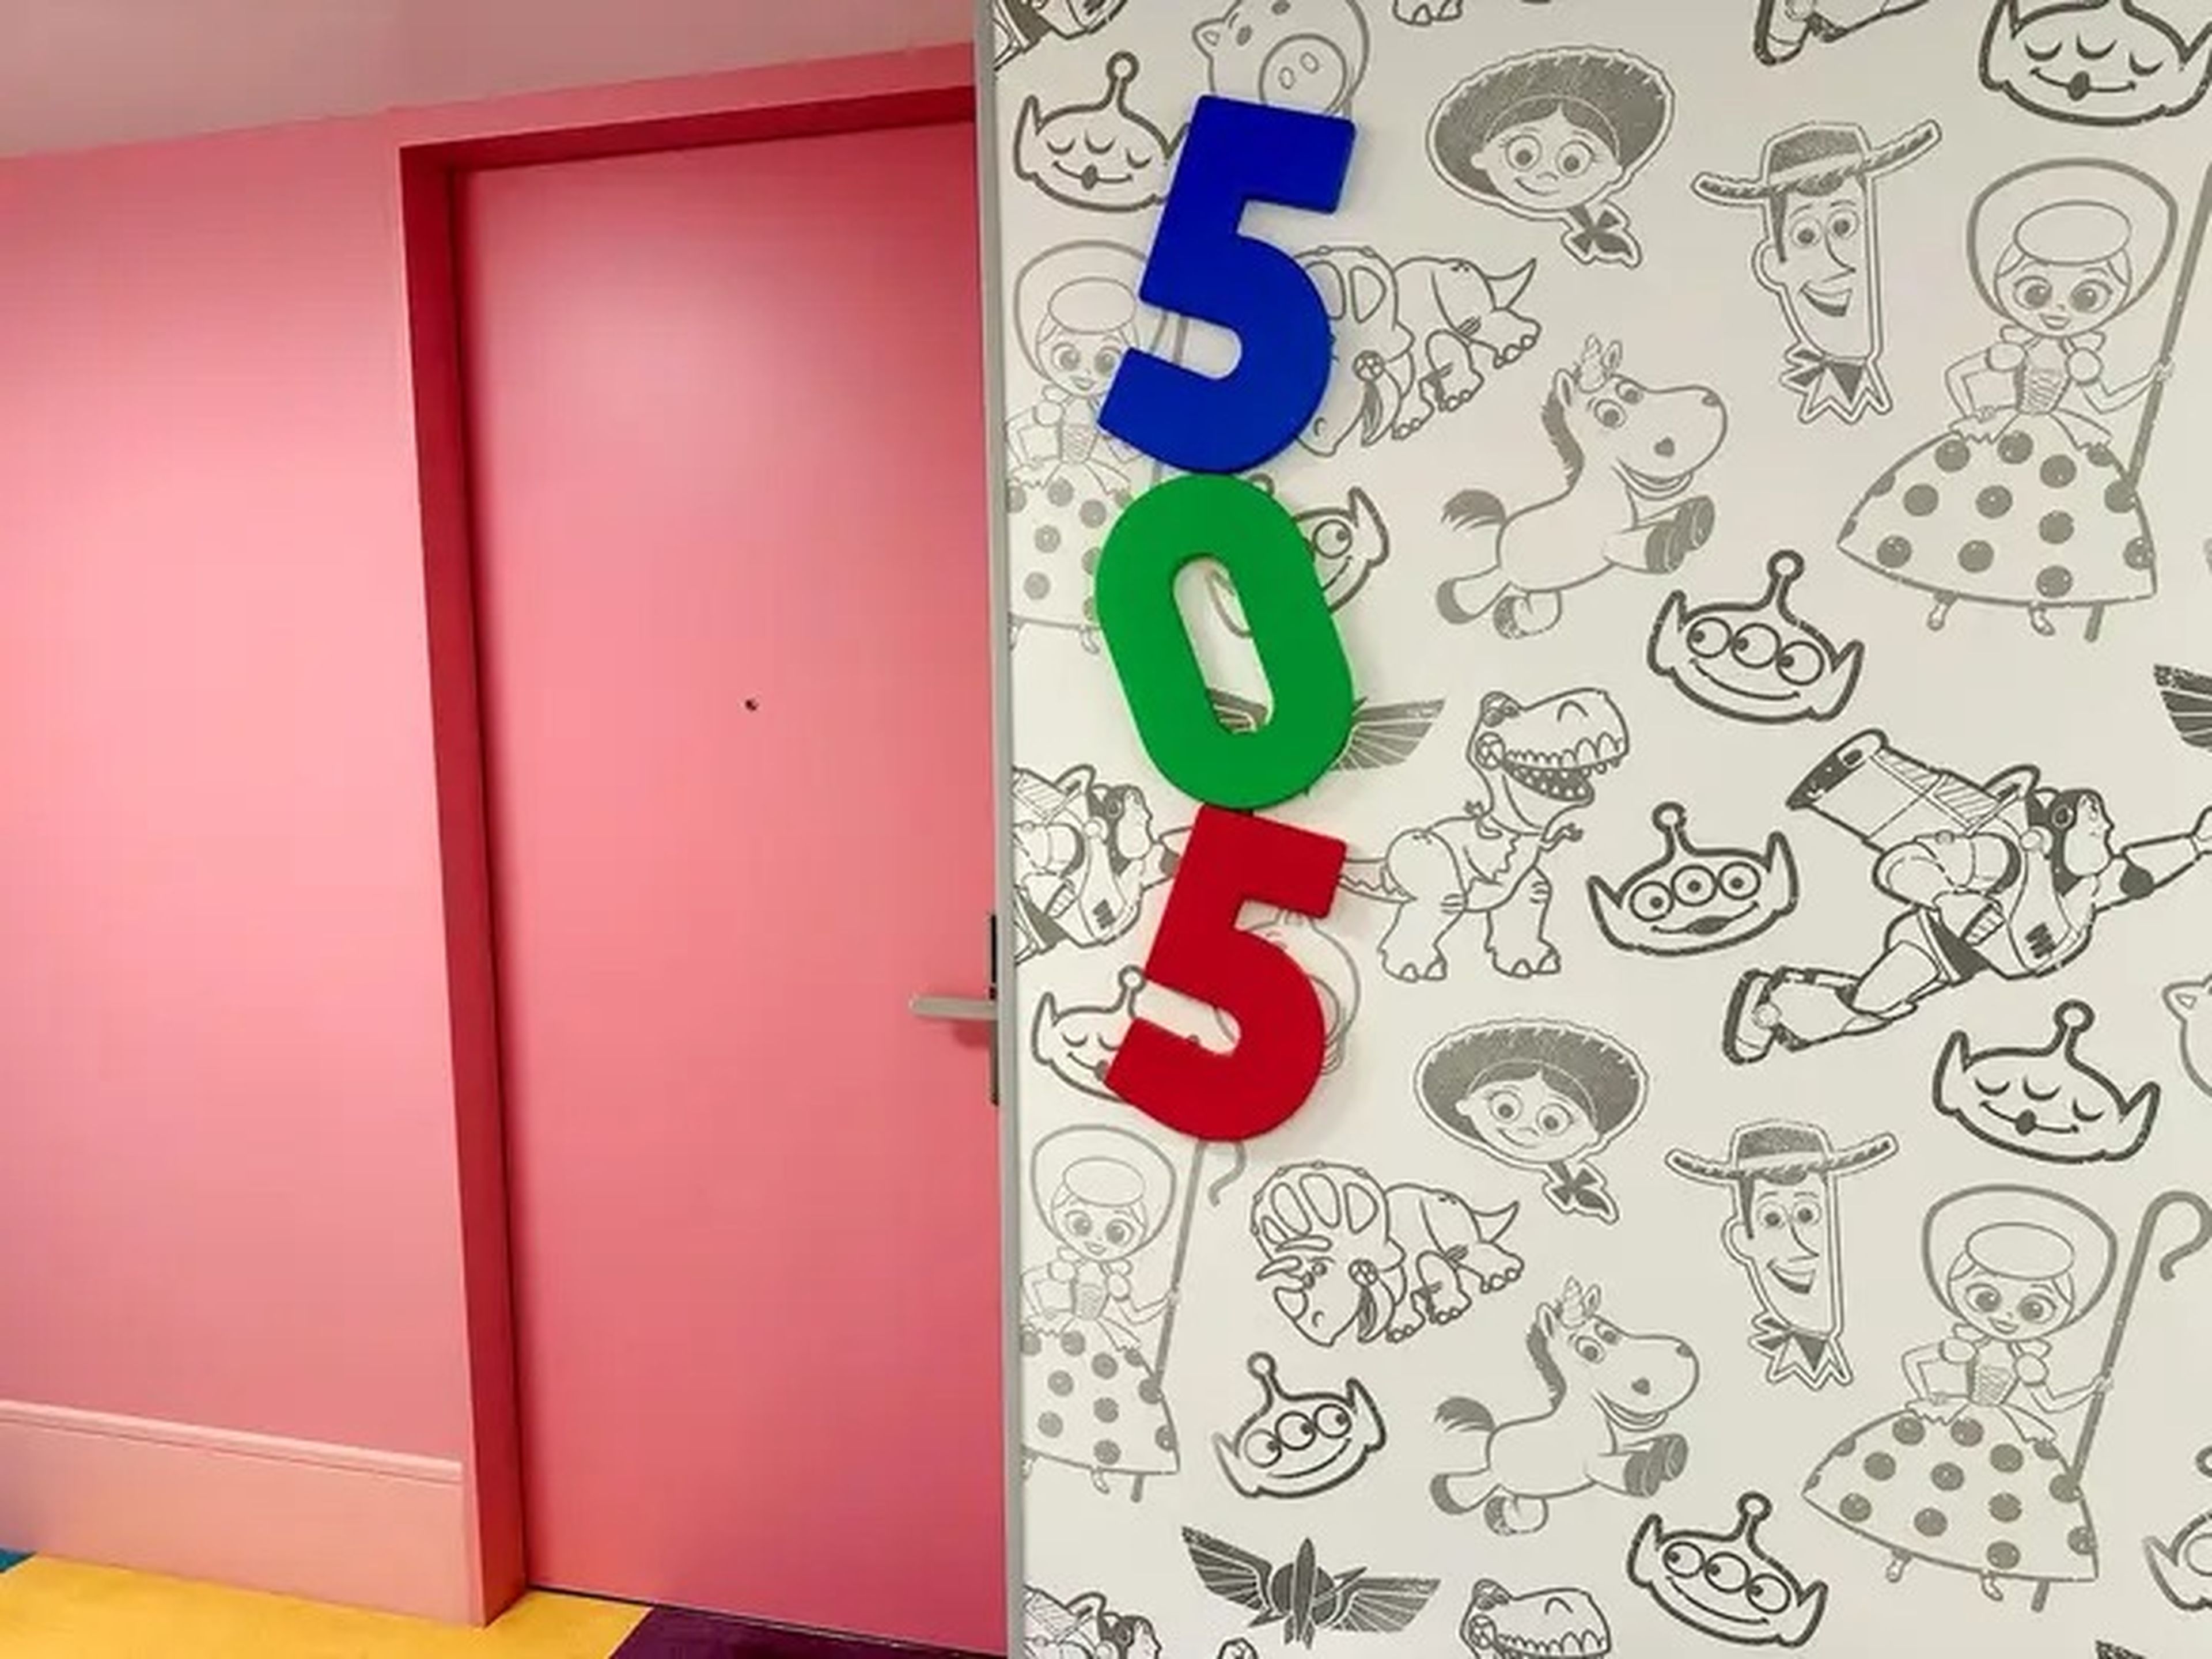 A room entrance at the Tokyo Toy Story Hotel shows a colorful pink door that is lined with the numbers 505 in blue, green, and red.